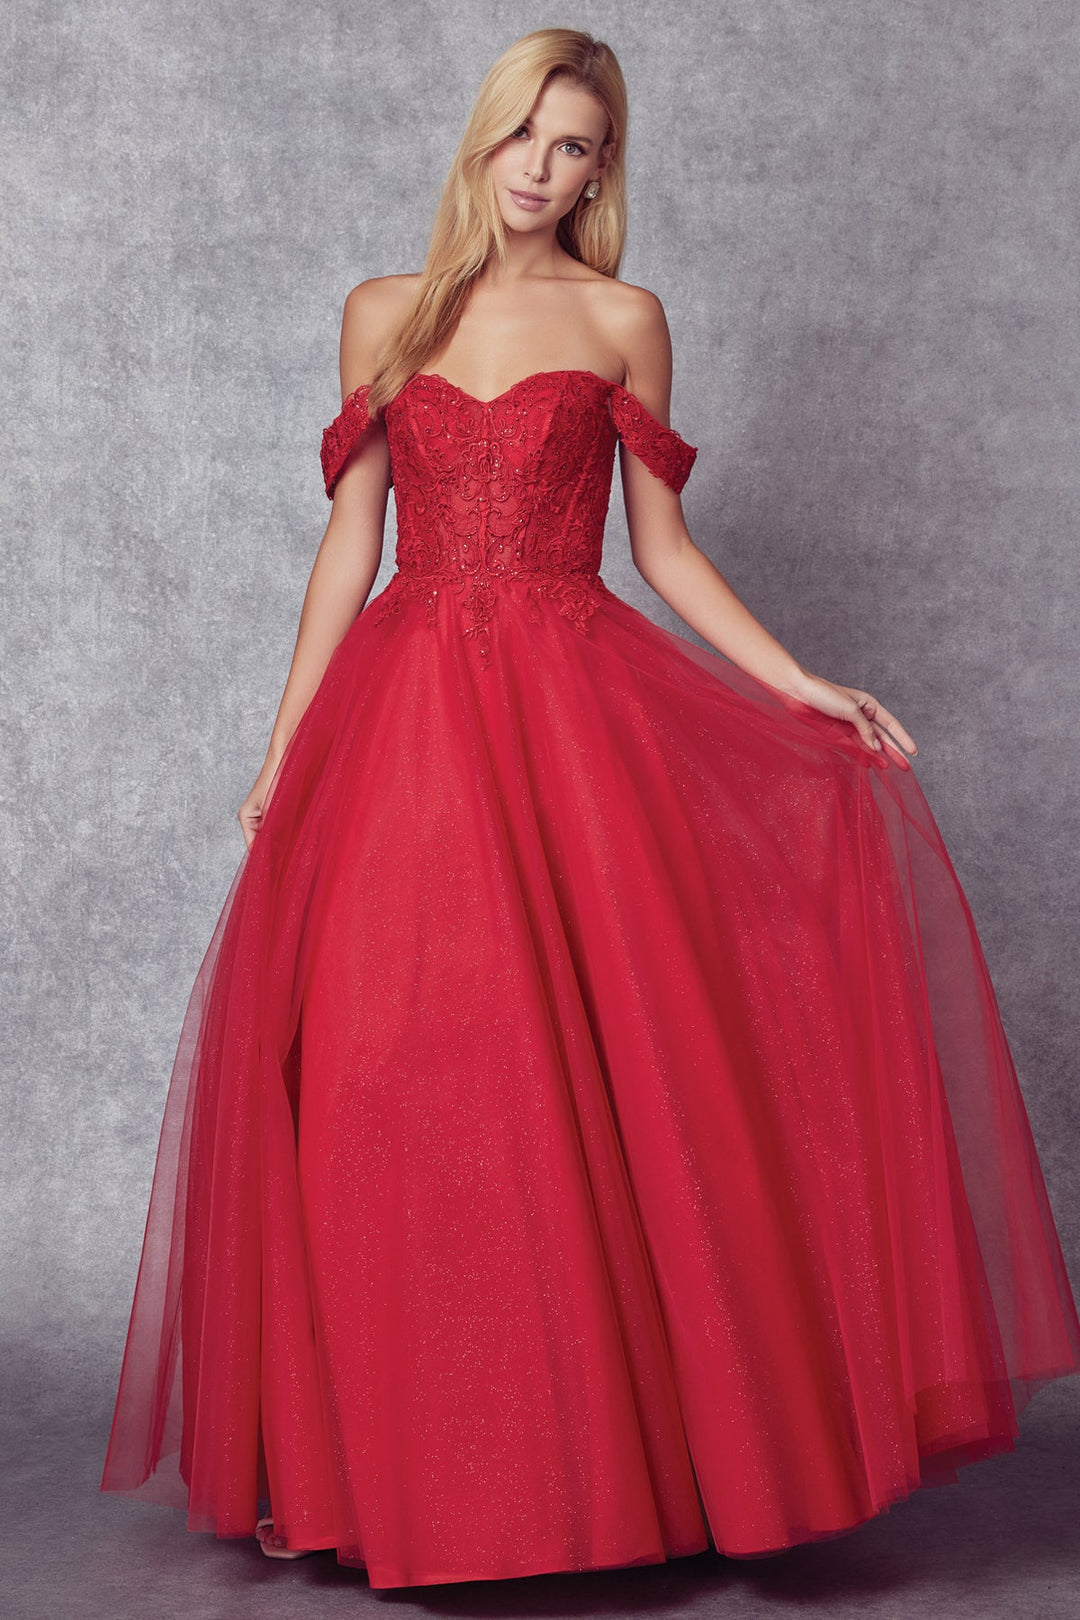 Embroidered Off Shoulder Tulle Gown by Juliet 280